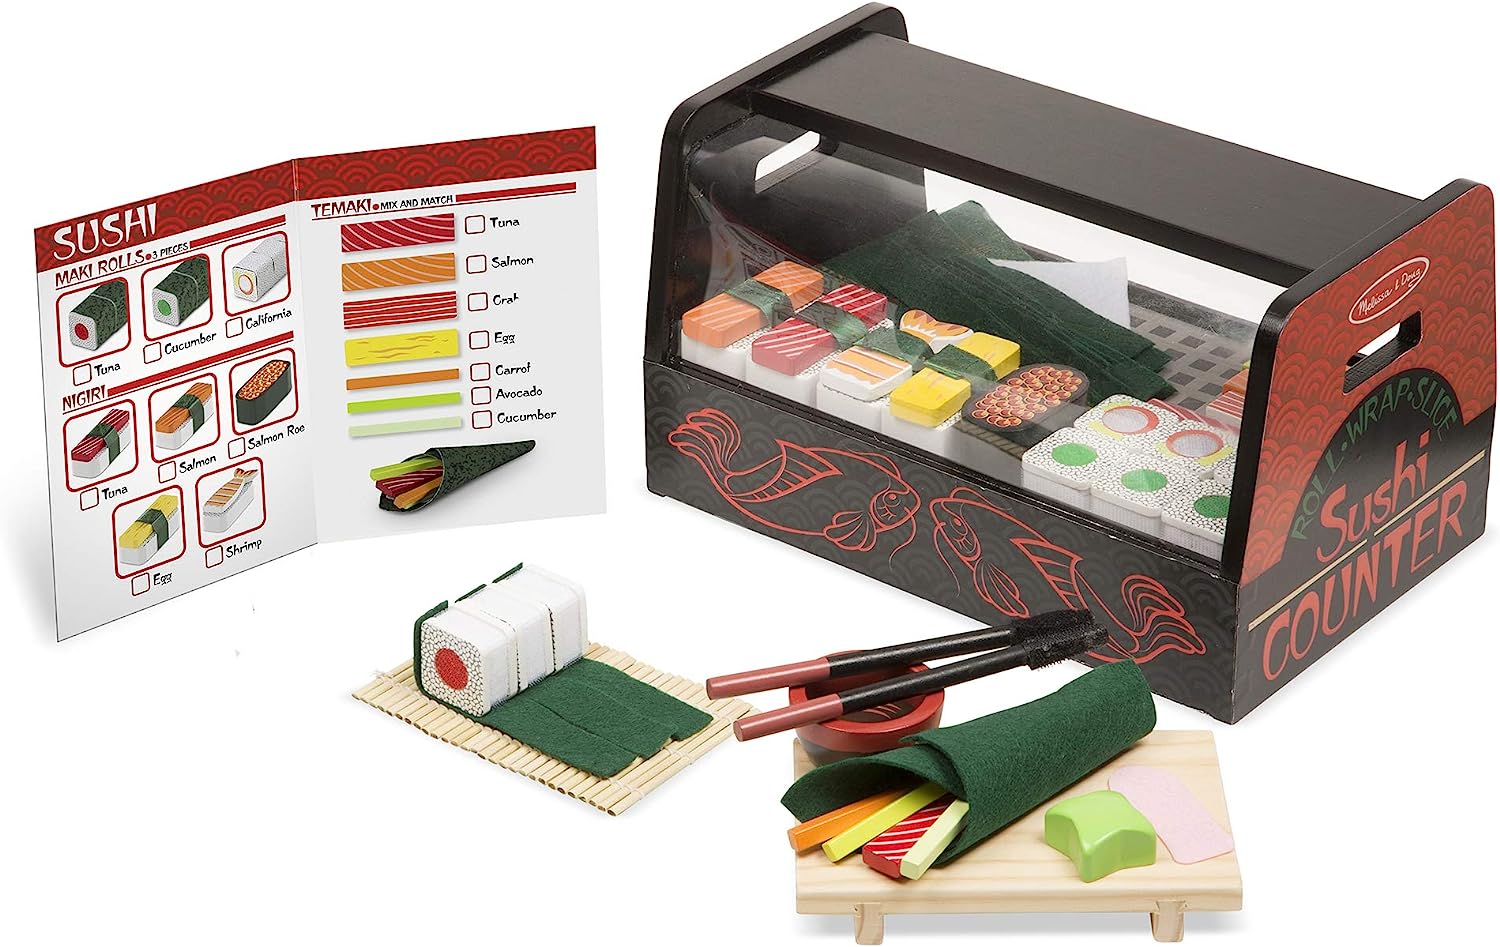 Roll, Wrap & Slice Sushi Counter Toy